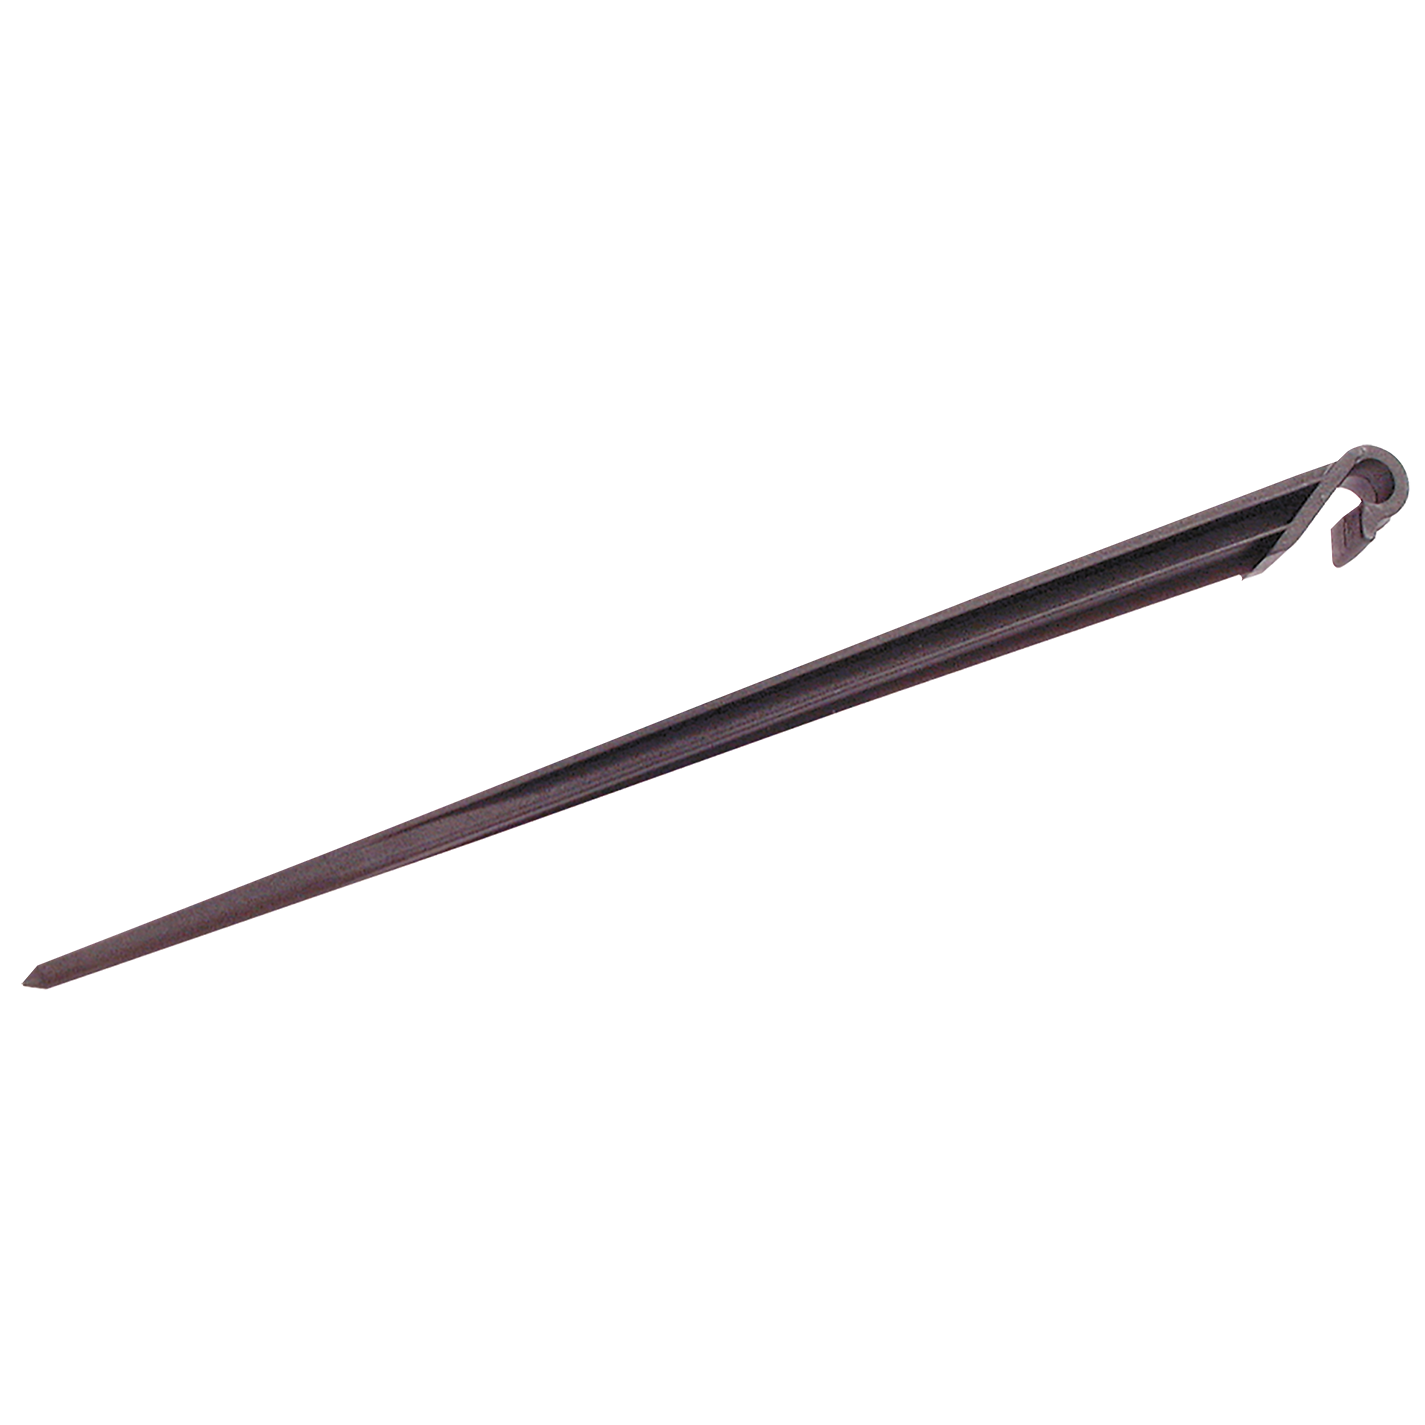 CLAMP STAKE